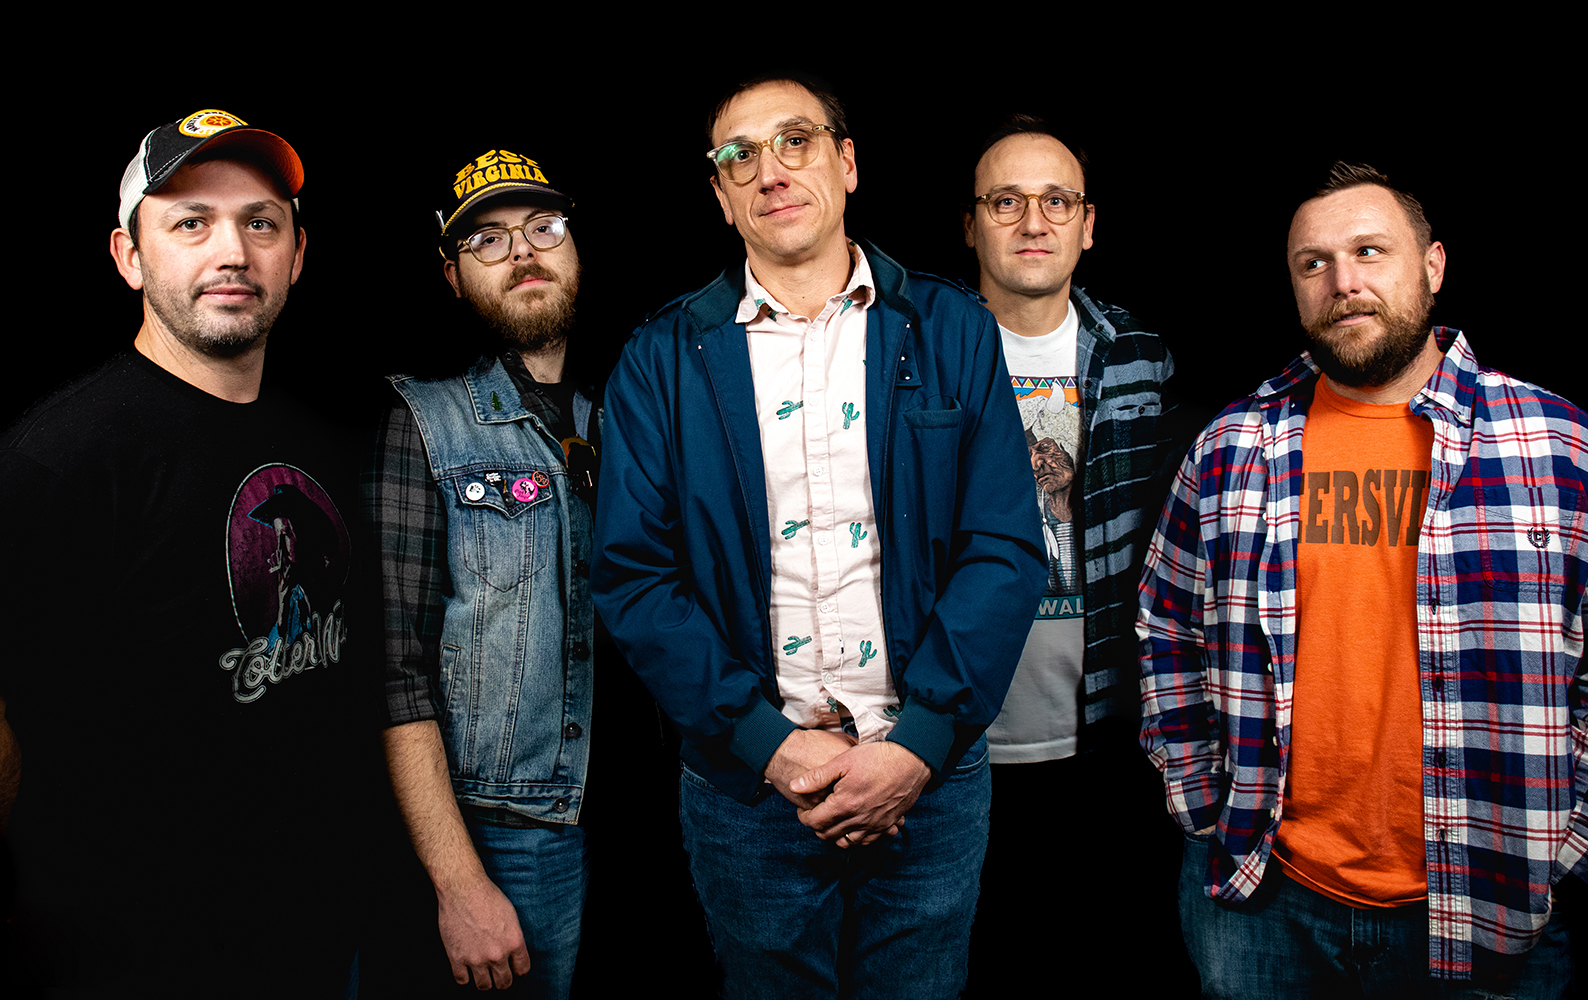 A promotional picture for Cutler Station, a rock band. The band is standing against a black background. From left are members Steve Lipscomb, Jacob Dunn, John Evans, Kirby Evans, and Jason Swiger.